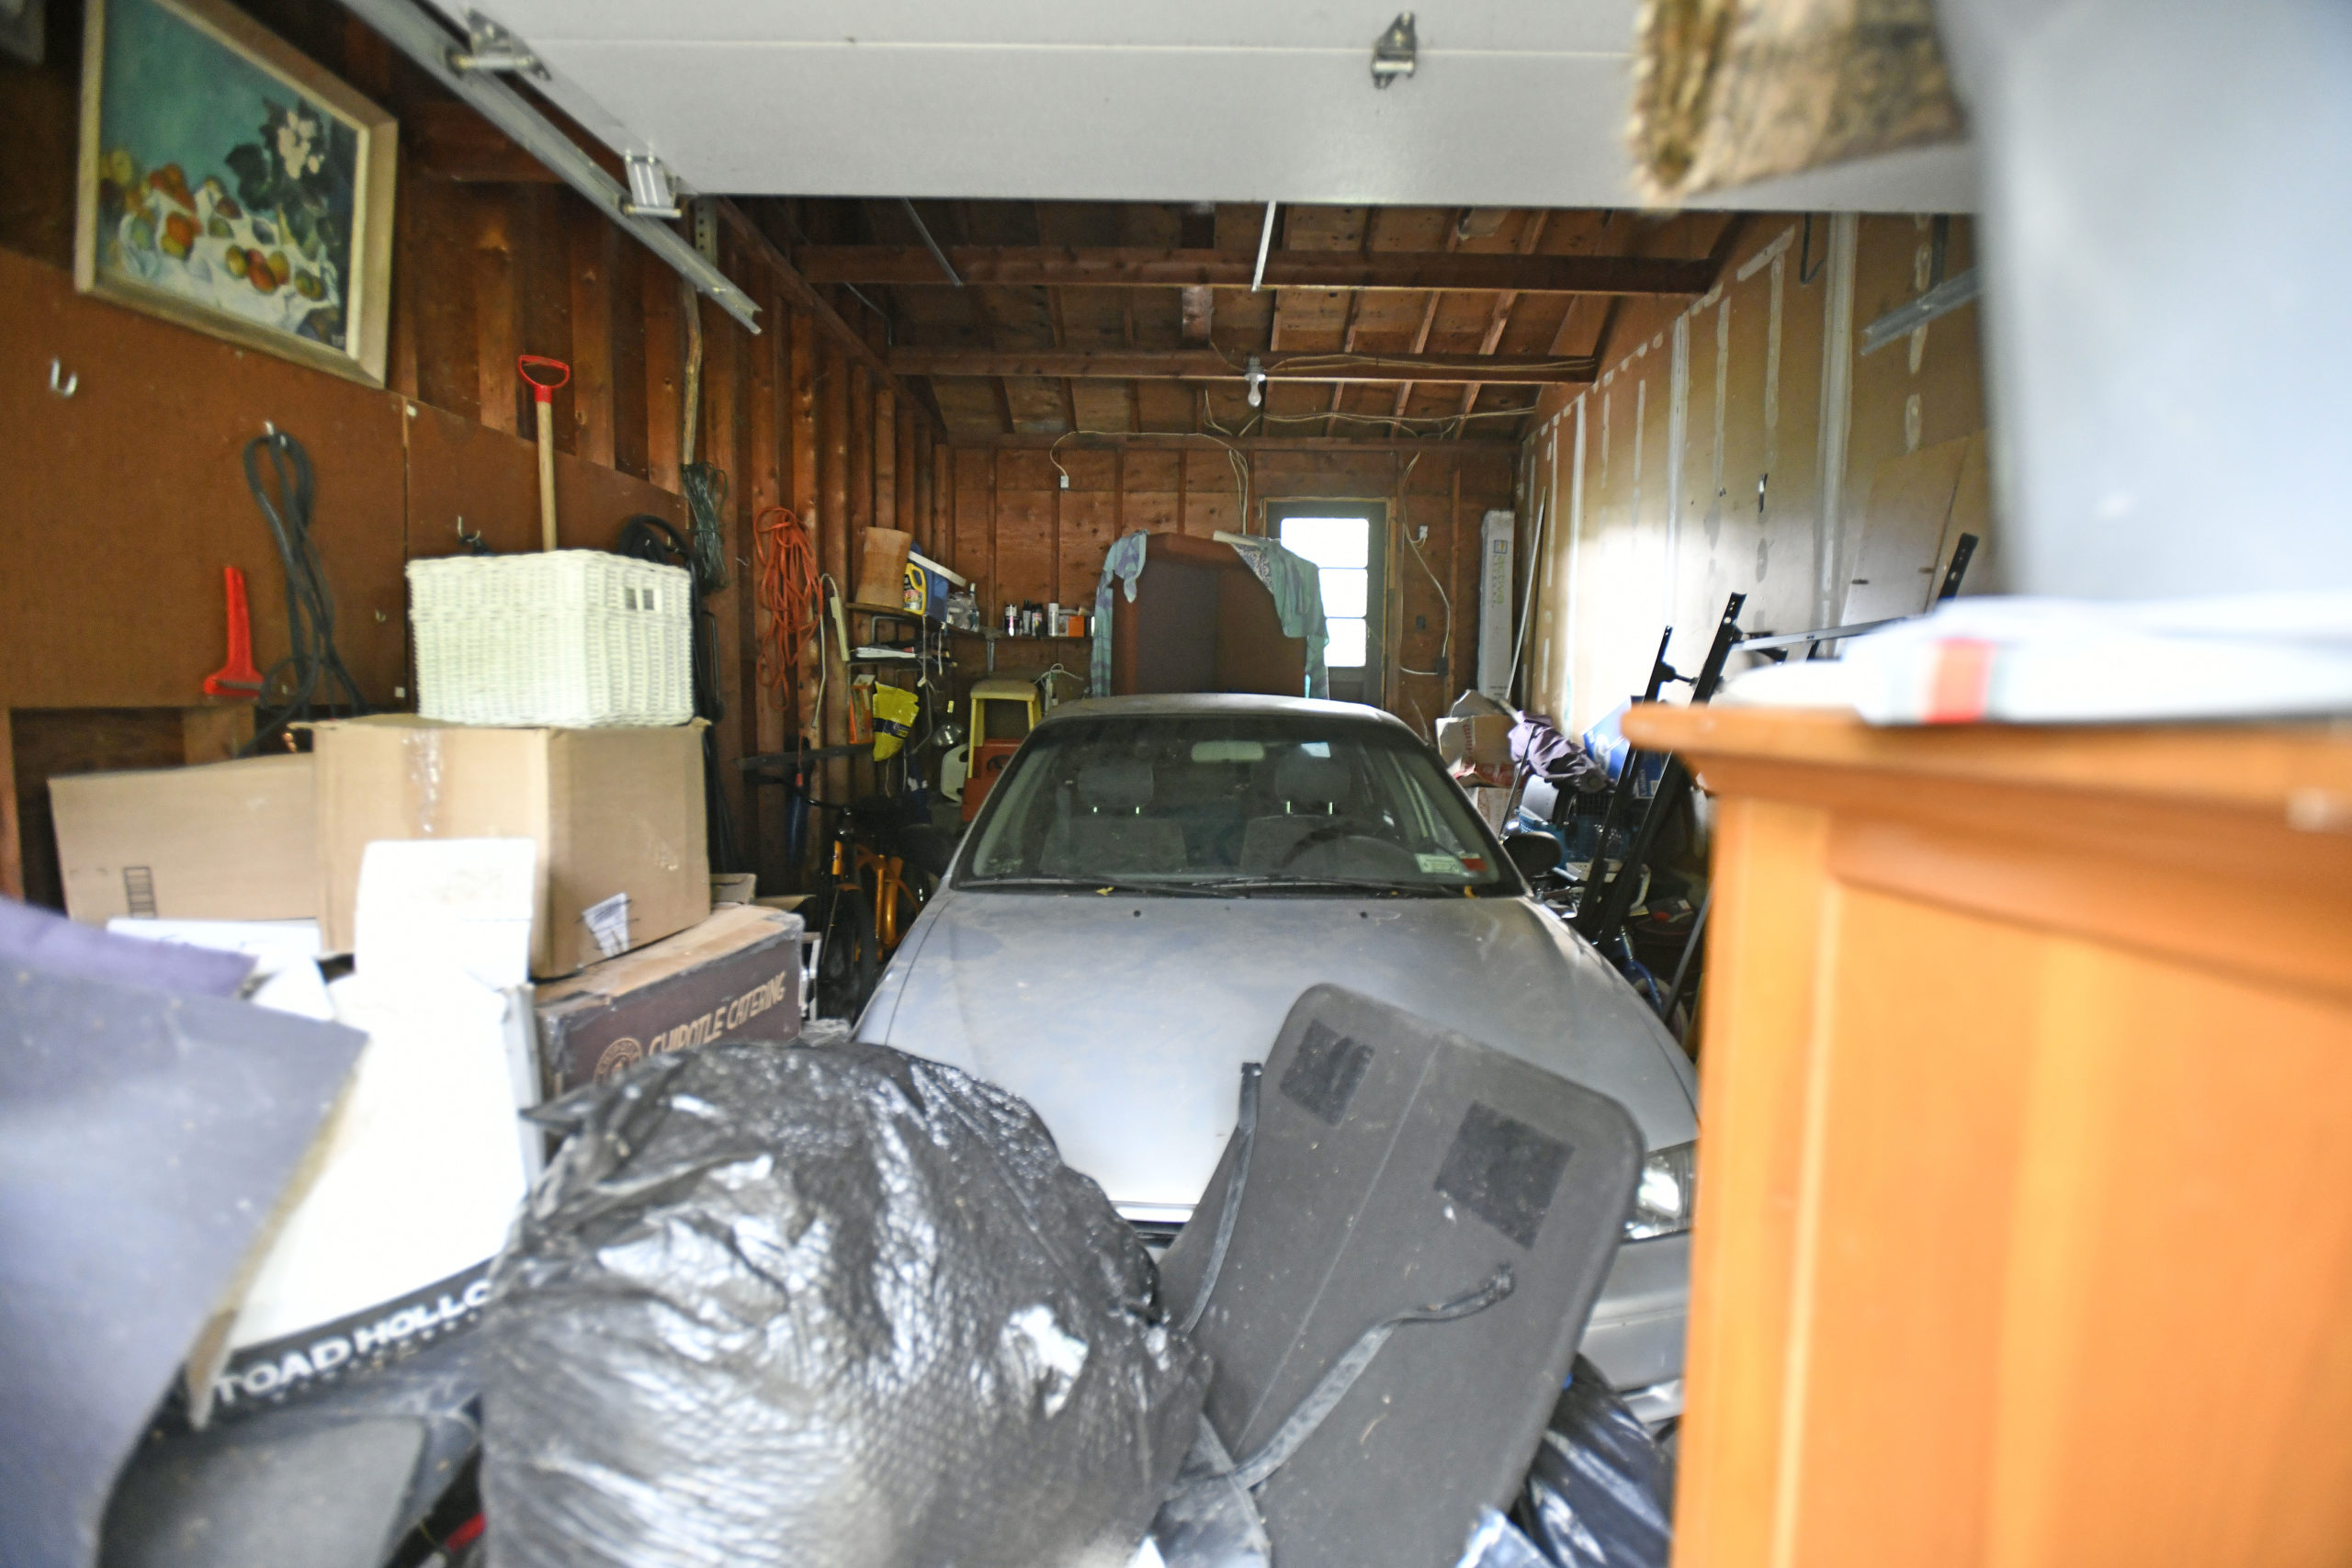 Some of her damaged items in the garage.            DANA SHAW